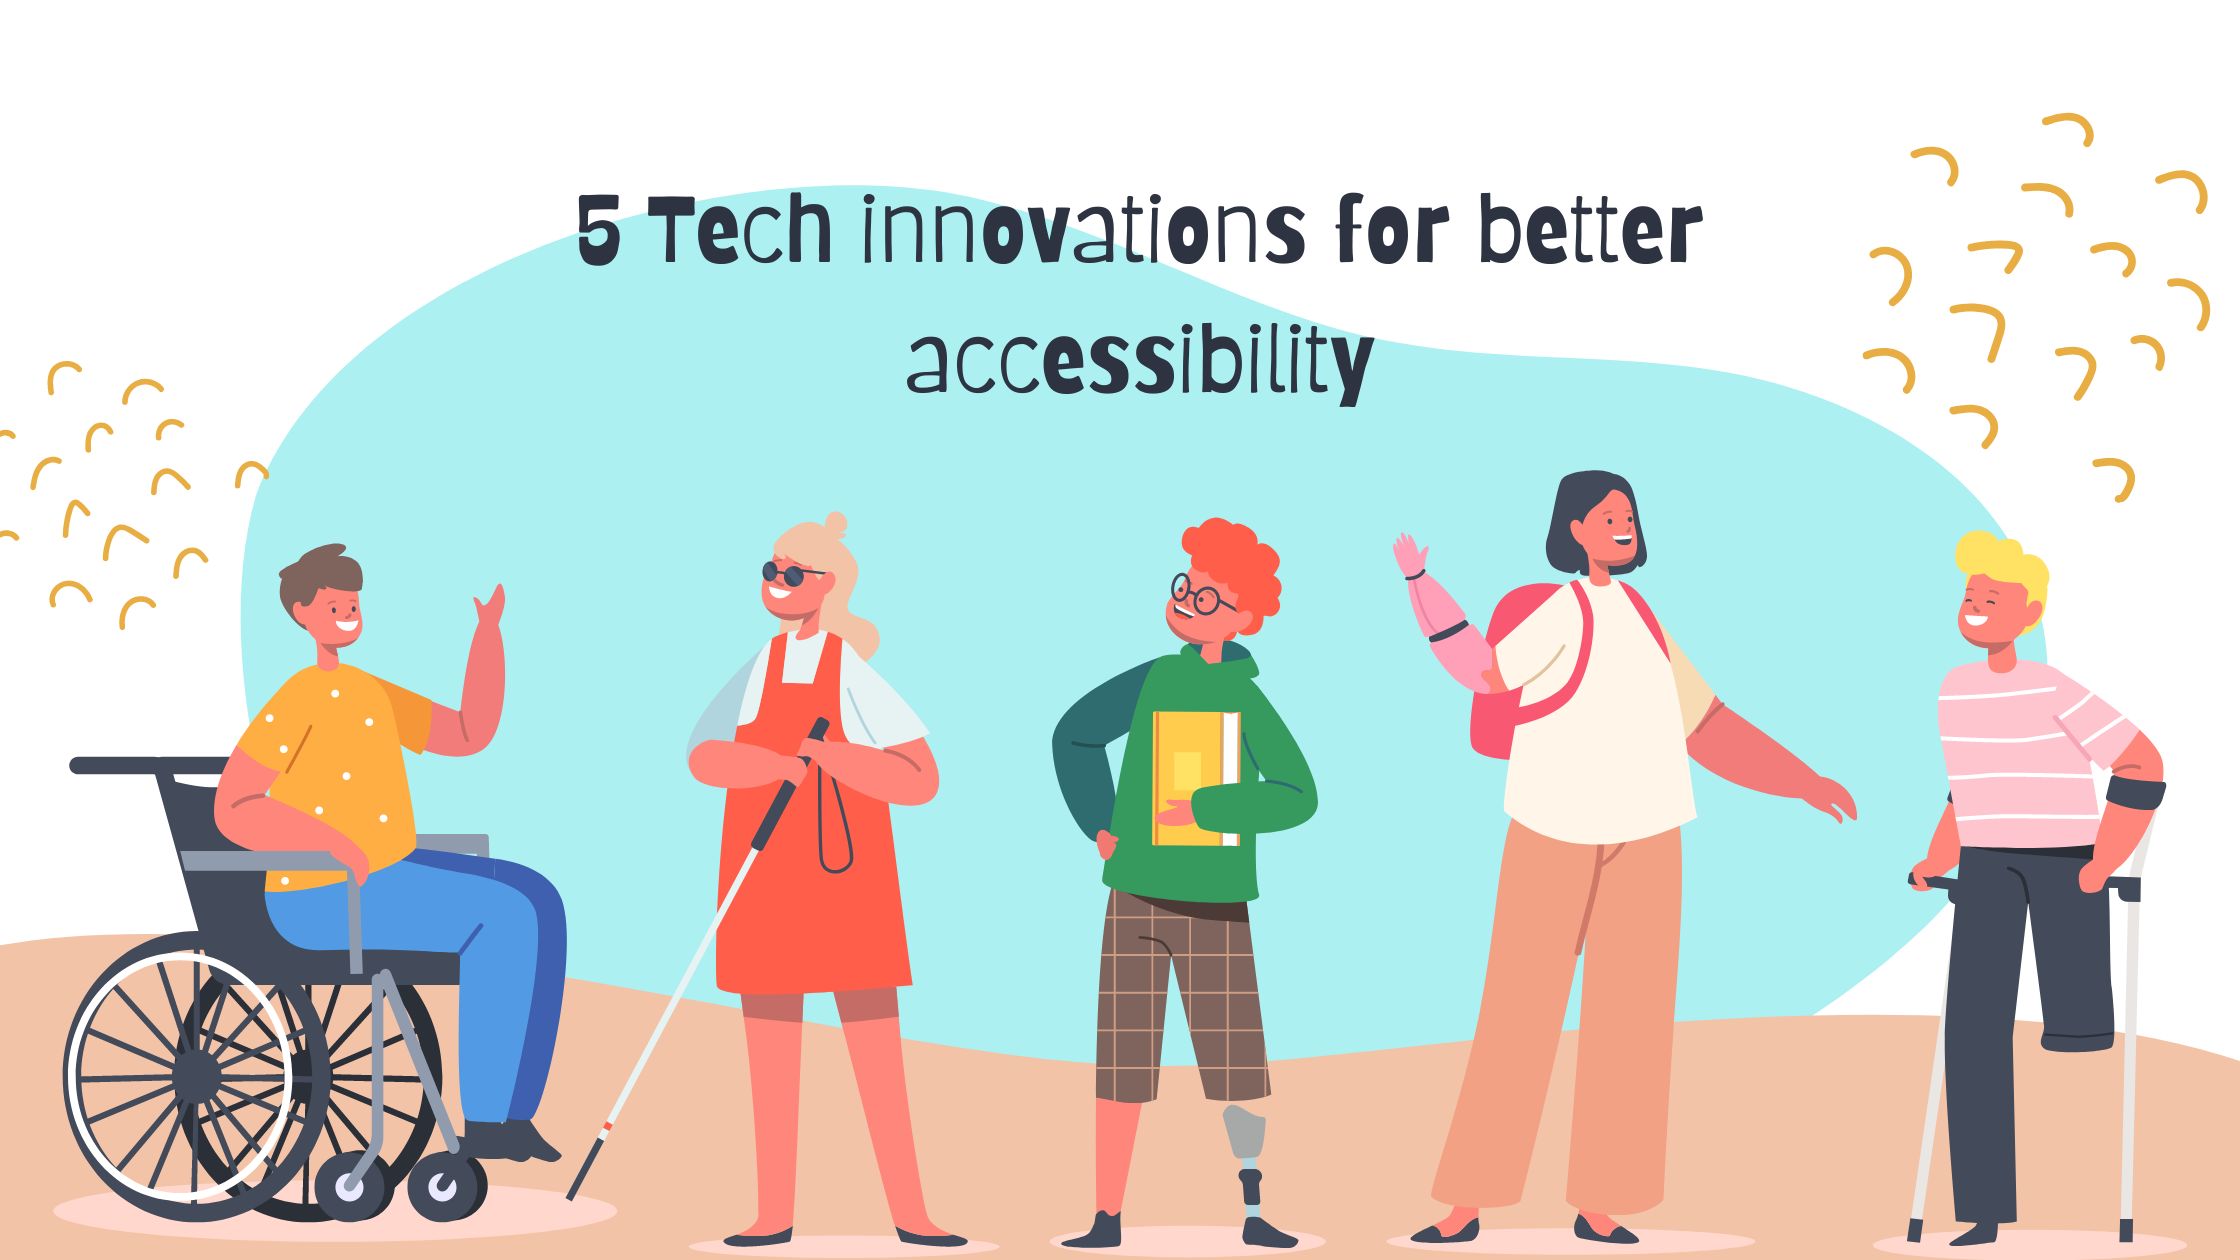 5 tech innovations for better accessibility